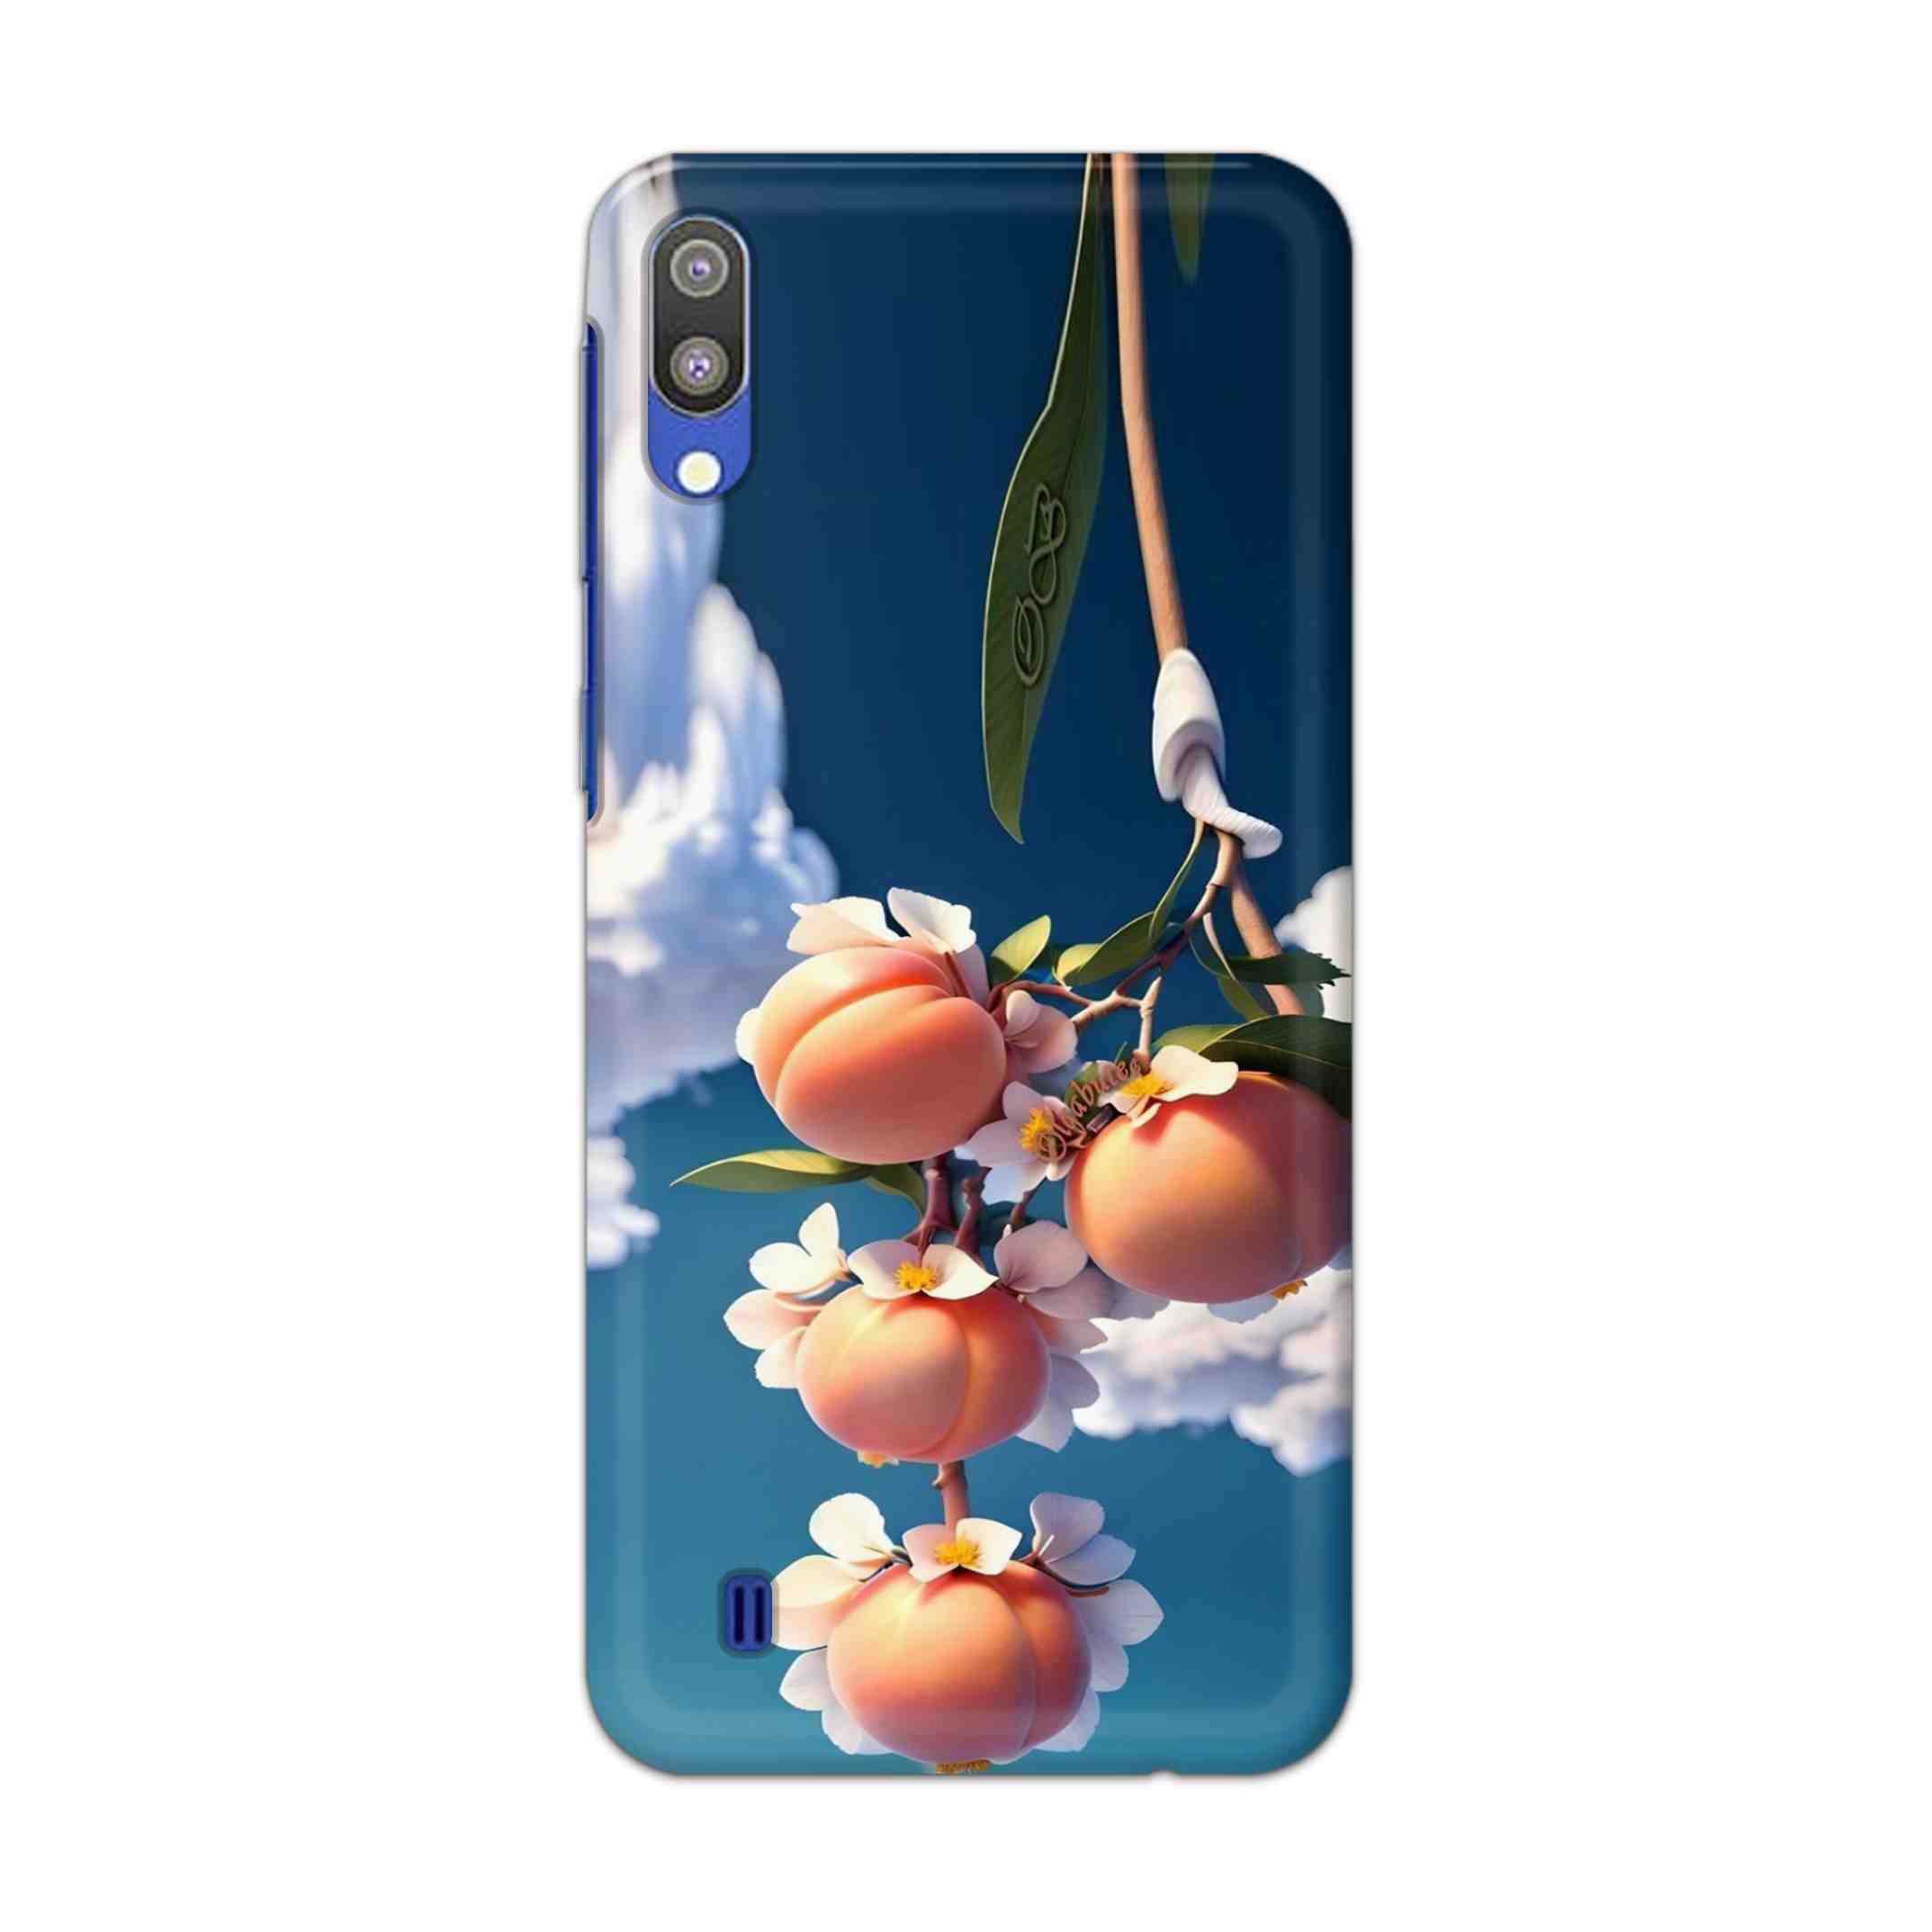 Buy Fruit Hard Back Mobile Phone Case Cover For Samsung Galaxy M10 Online